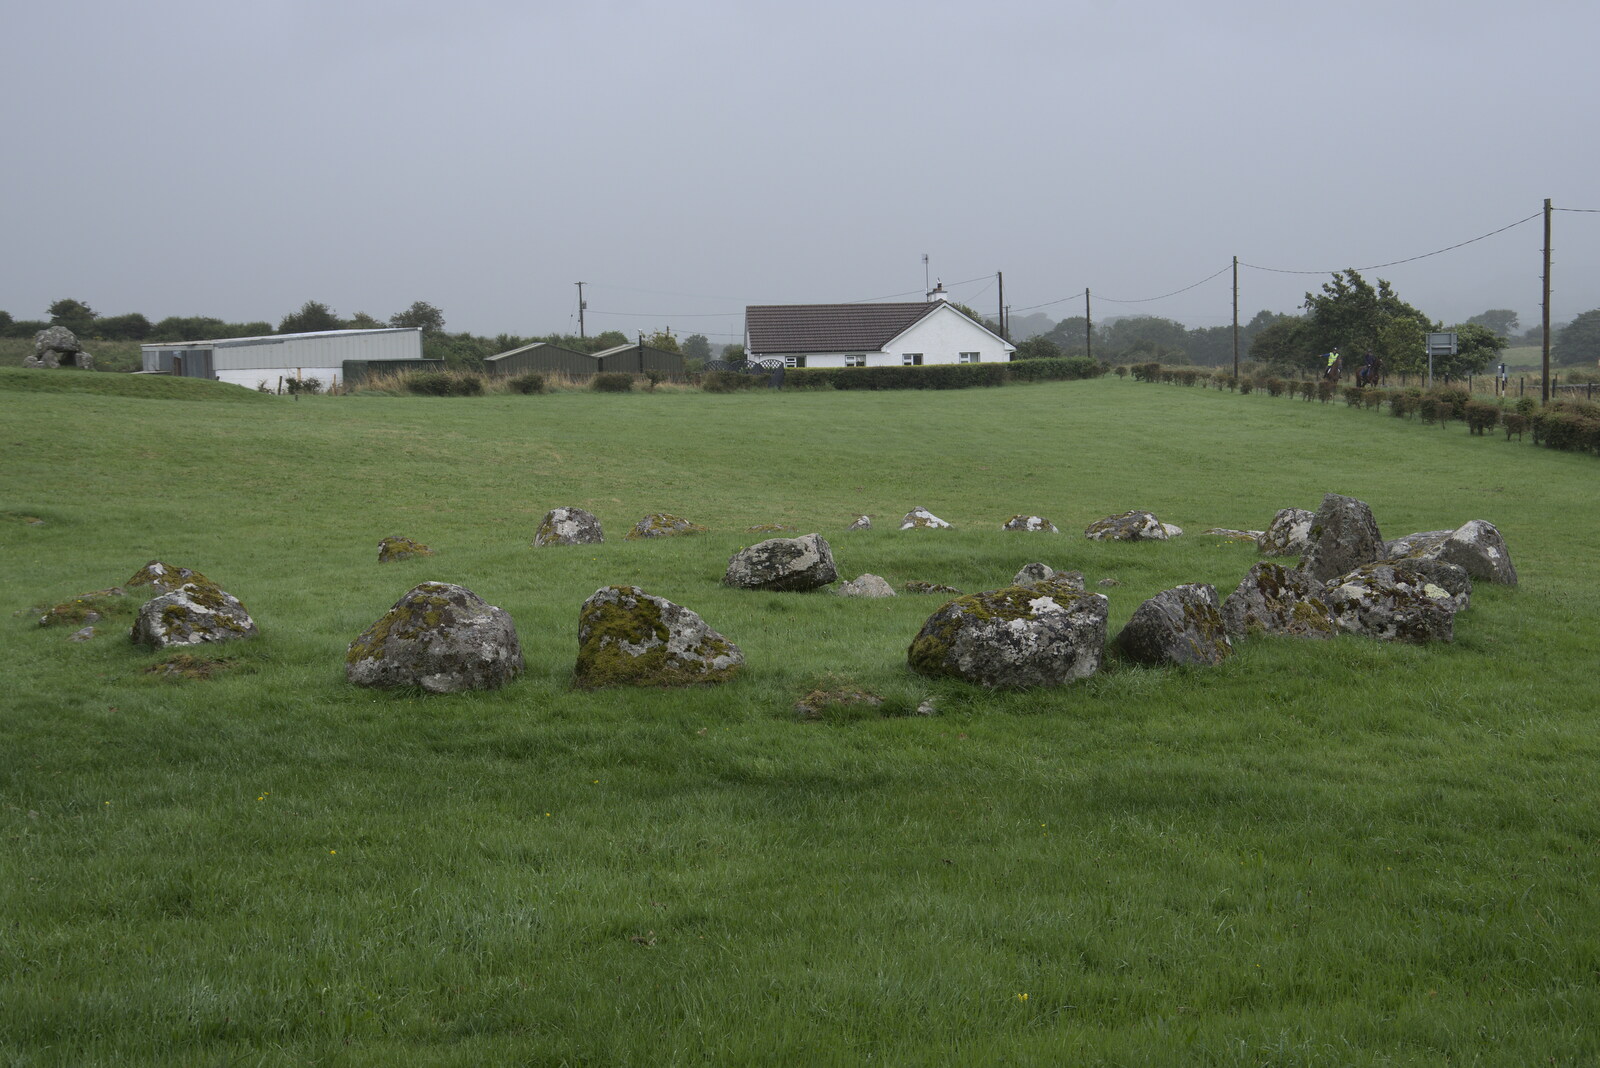 Another stone circle in a field from Walks Around Benbulben and Carrowmore, County Sligo, Ireland - 13th August 2021